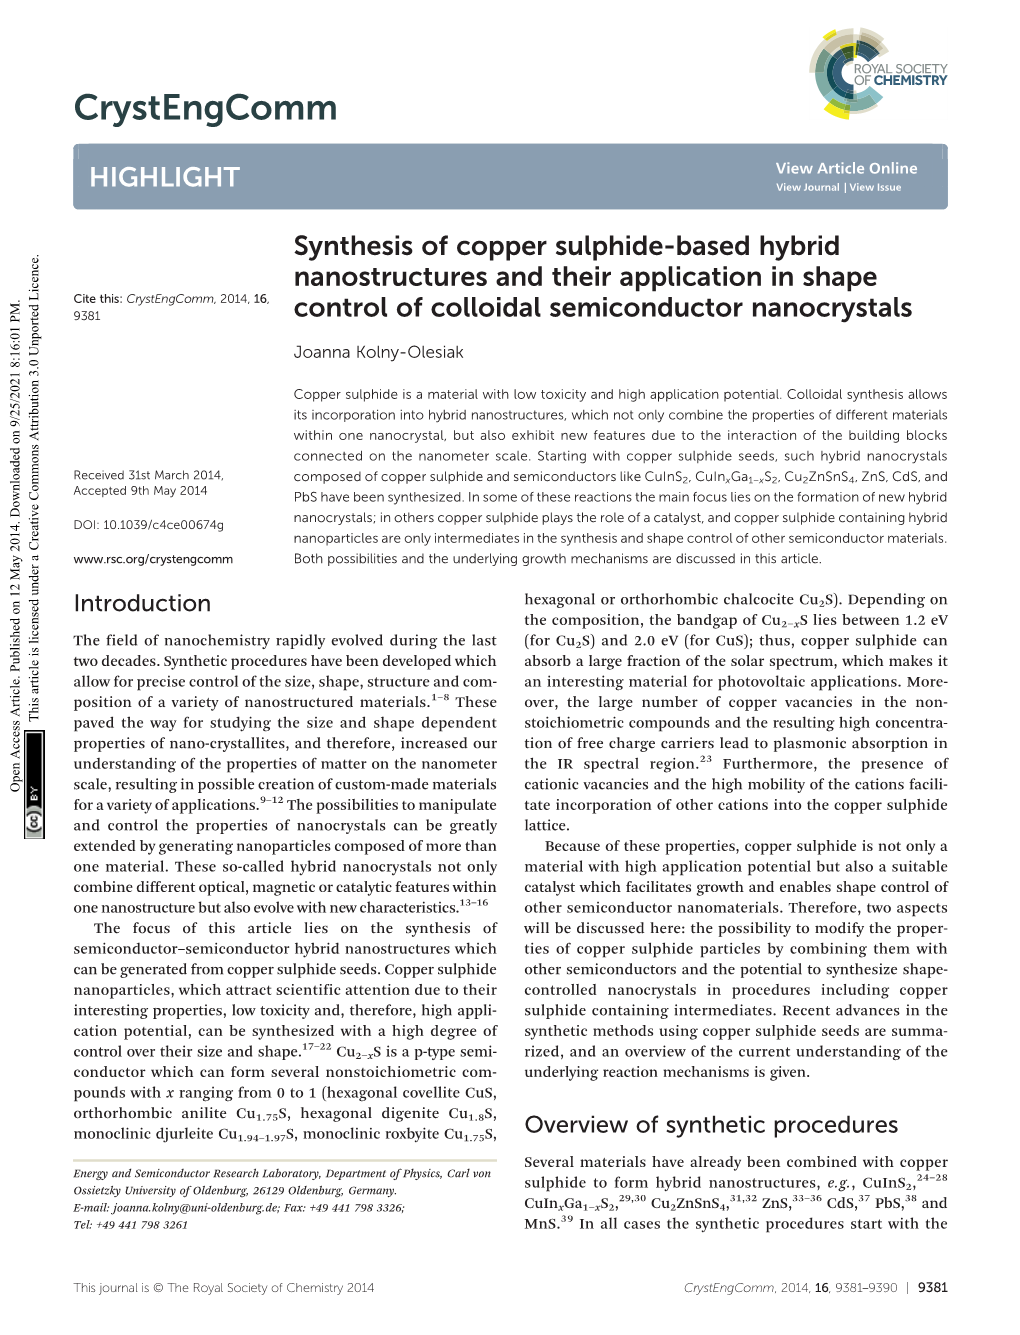 Synthesis of Copper Sulphide-Based Hybrid Nanostructures and Their